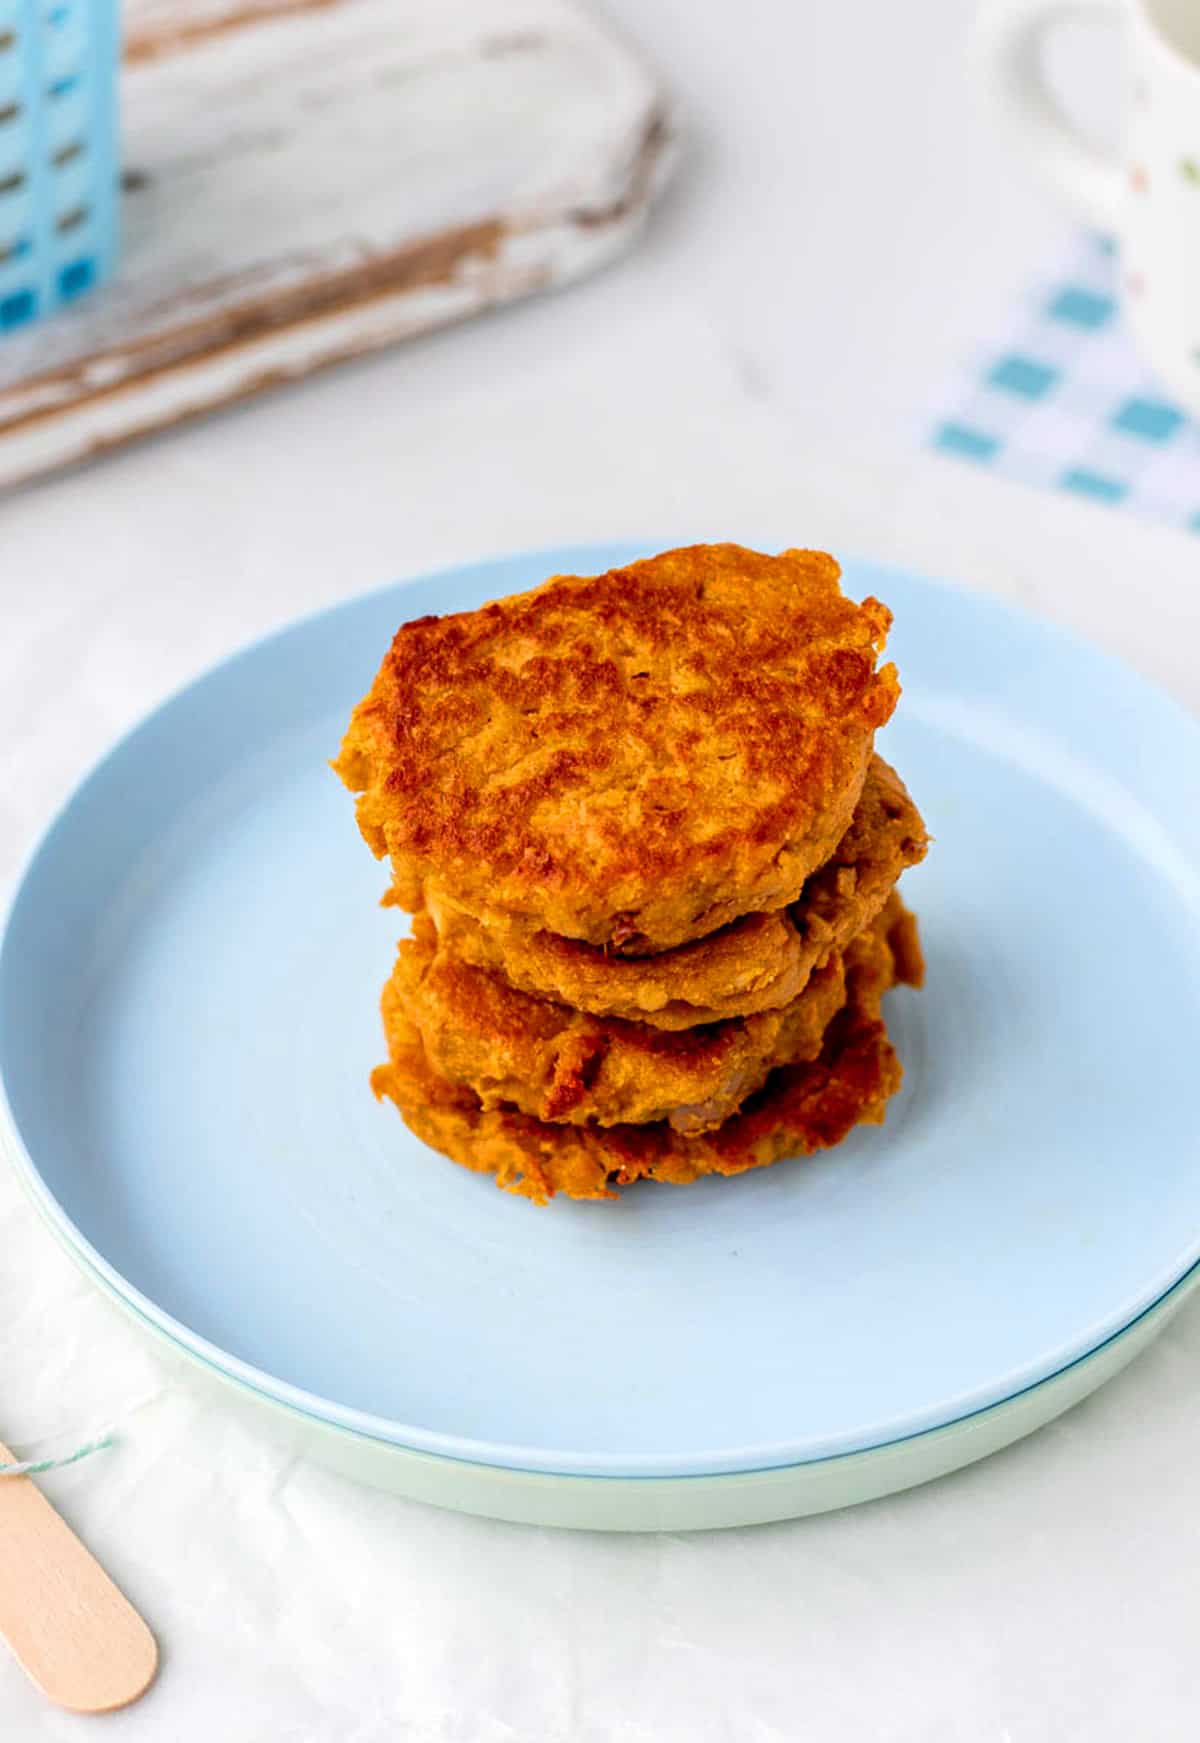 A stack of sweet potato patties on a blue plate.